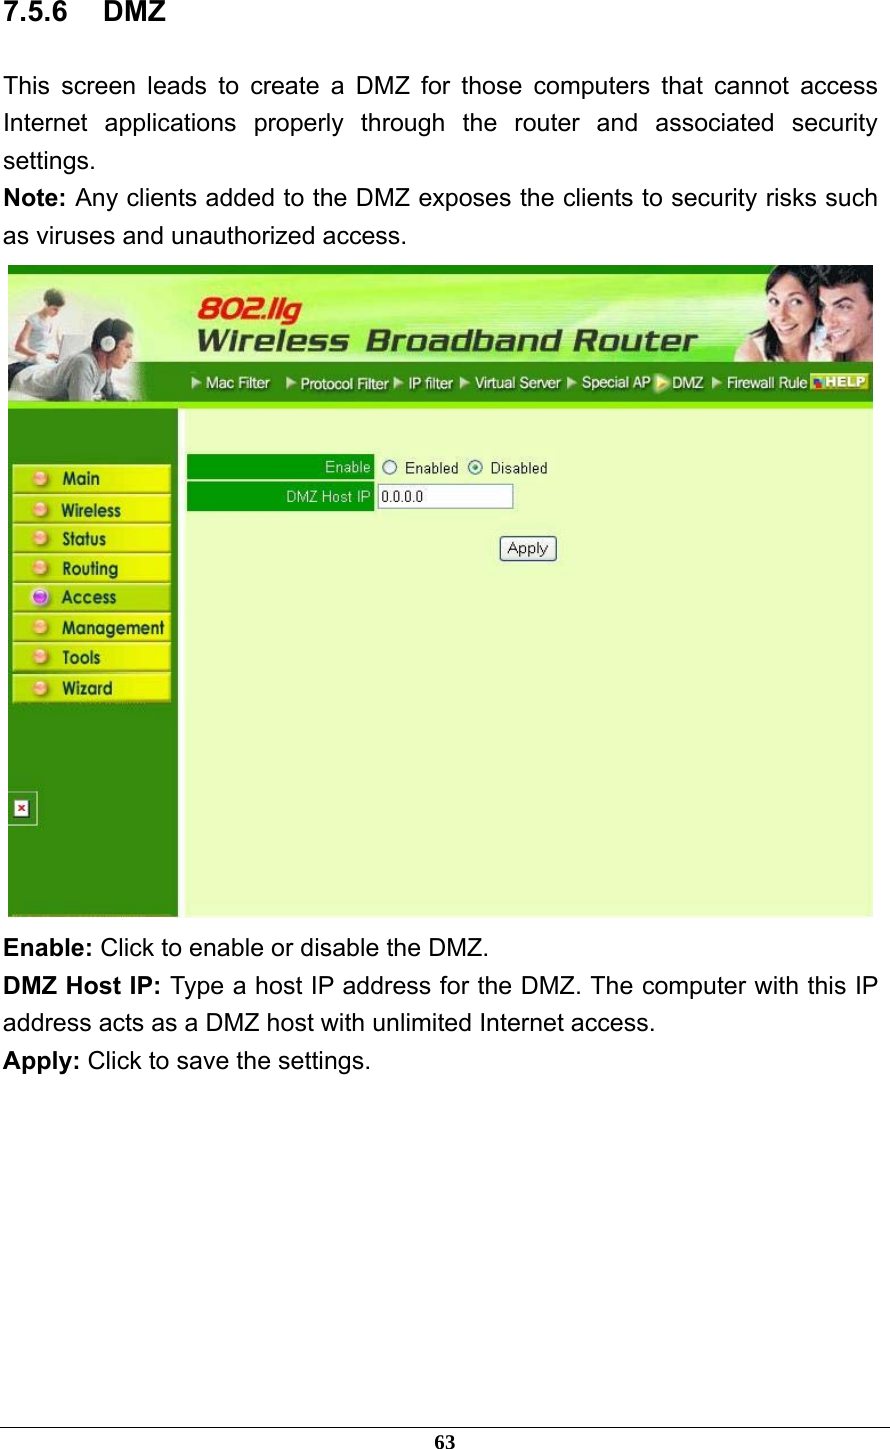 7.5.6 DMZ This screen leads to create a DMZ for those computers that cannot access Internet applications properly through the router and associated security settings.  Note: Any clients added to the DMZ exposes the clients to security risks such as viruses and unauthorized access.  Enable: Click to enable or disable the DMZ. DMZ Host IP: Type a host IP address for the DMZ. The computer with this IP address acts as a DMZ host with unlimited Internet access. Apply: Click to save the settings.       63 